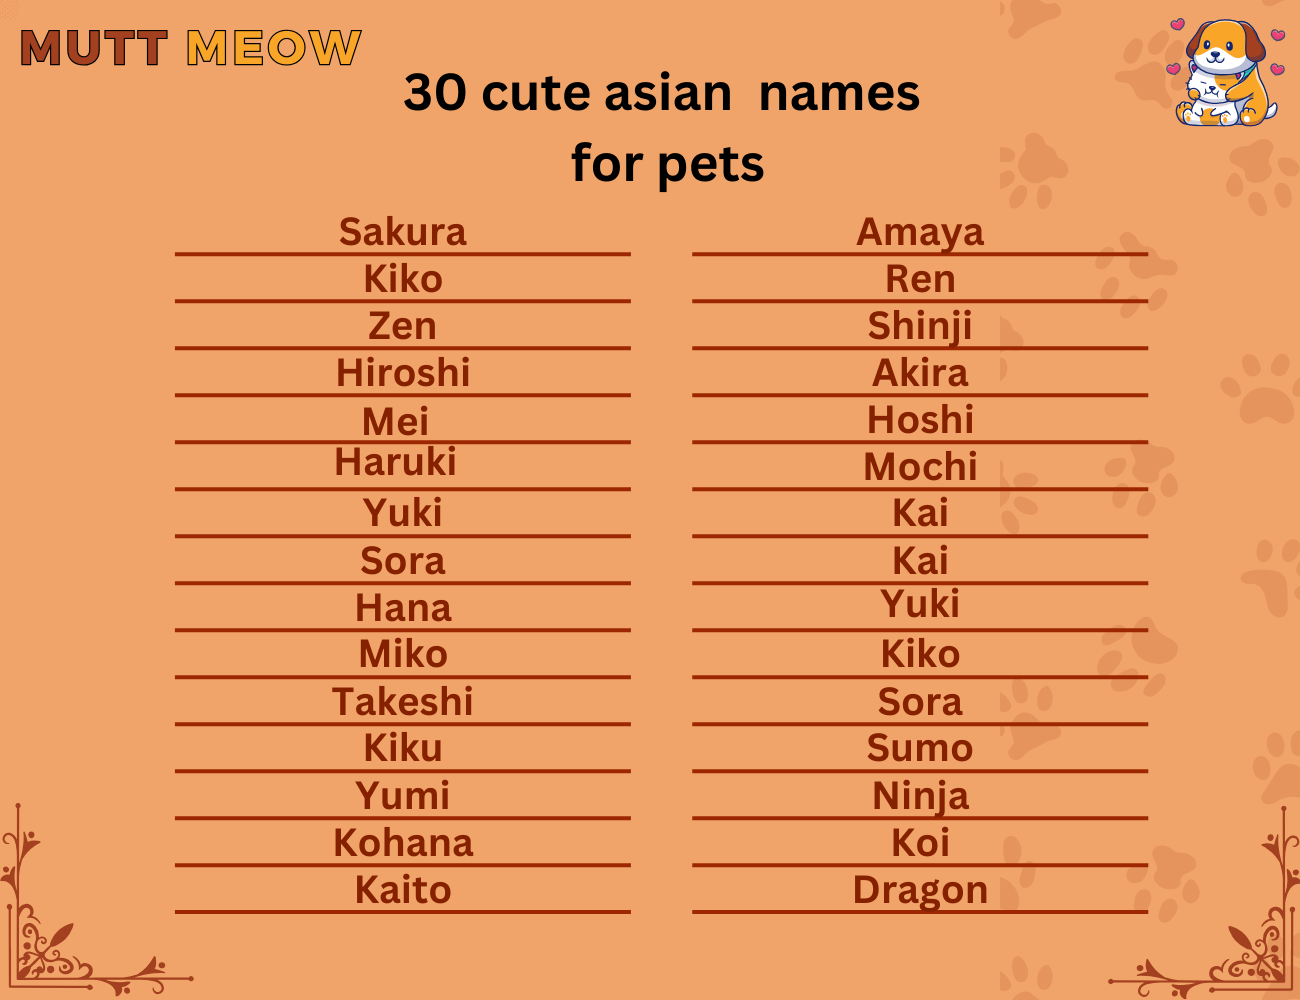 30 cute asian names for pets